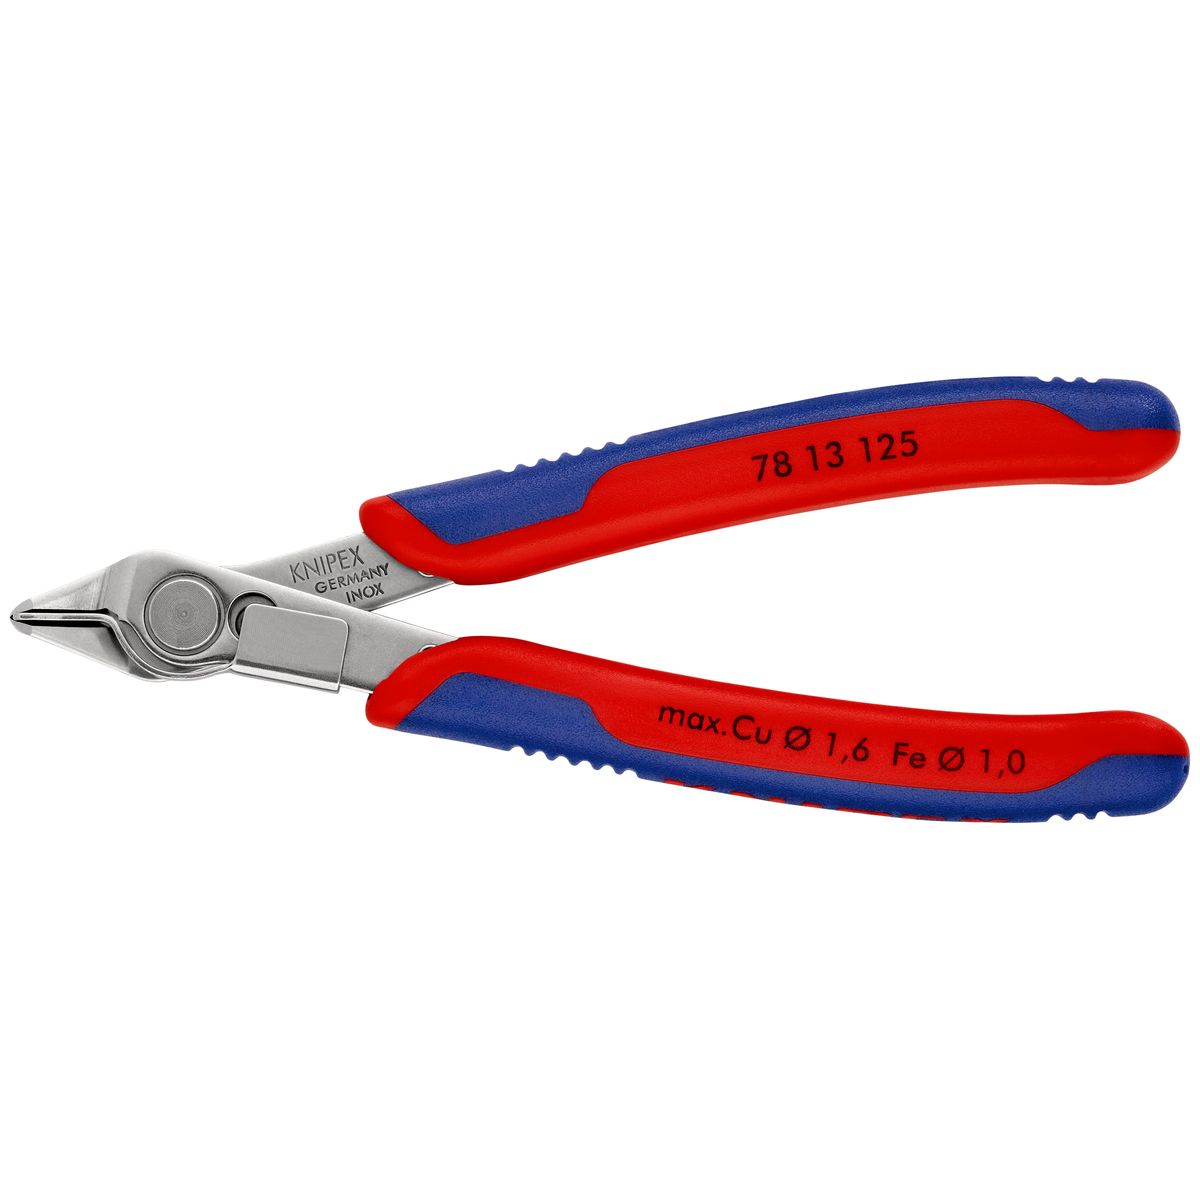 ELECTRONIC-SUPER-KNIPS 7813125 Knipex